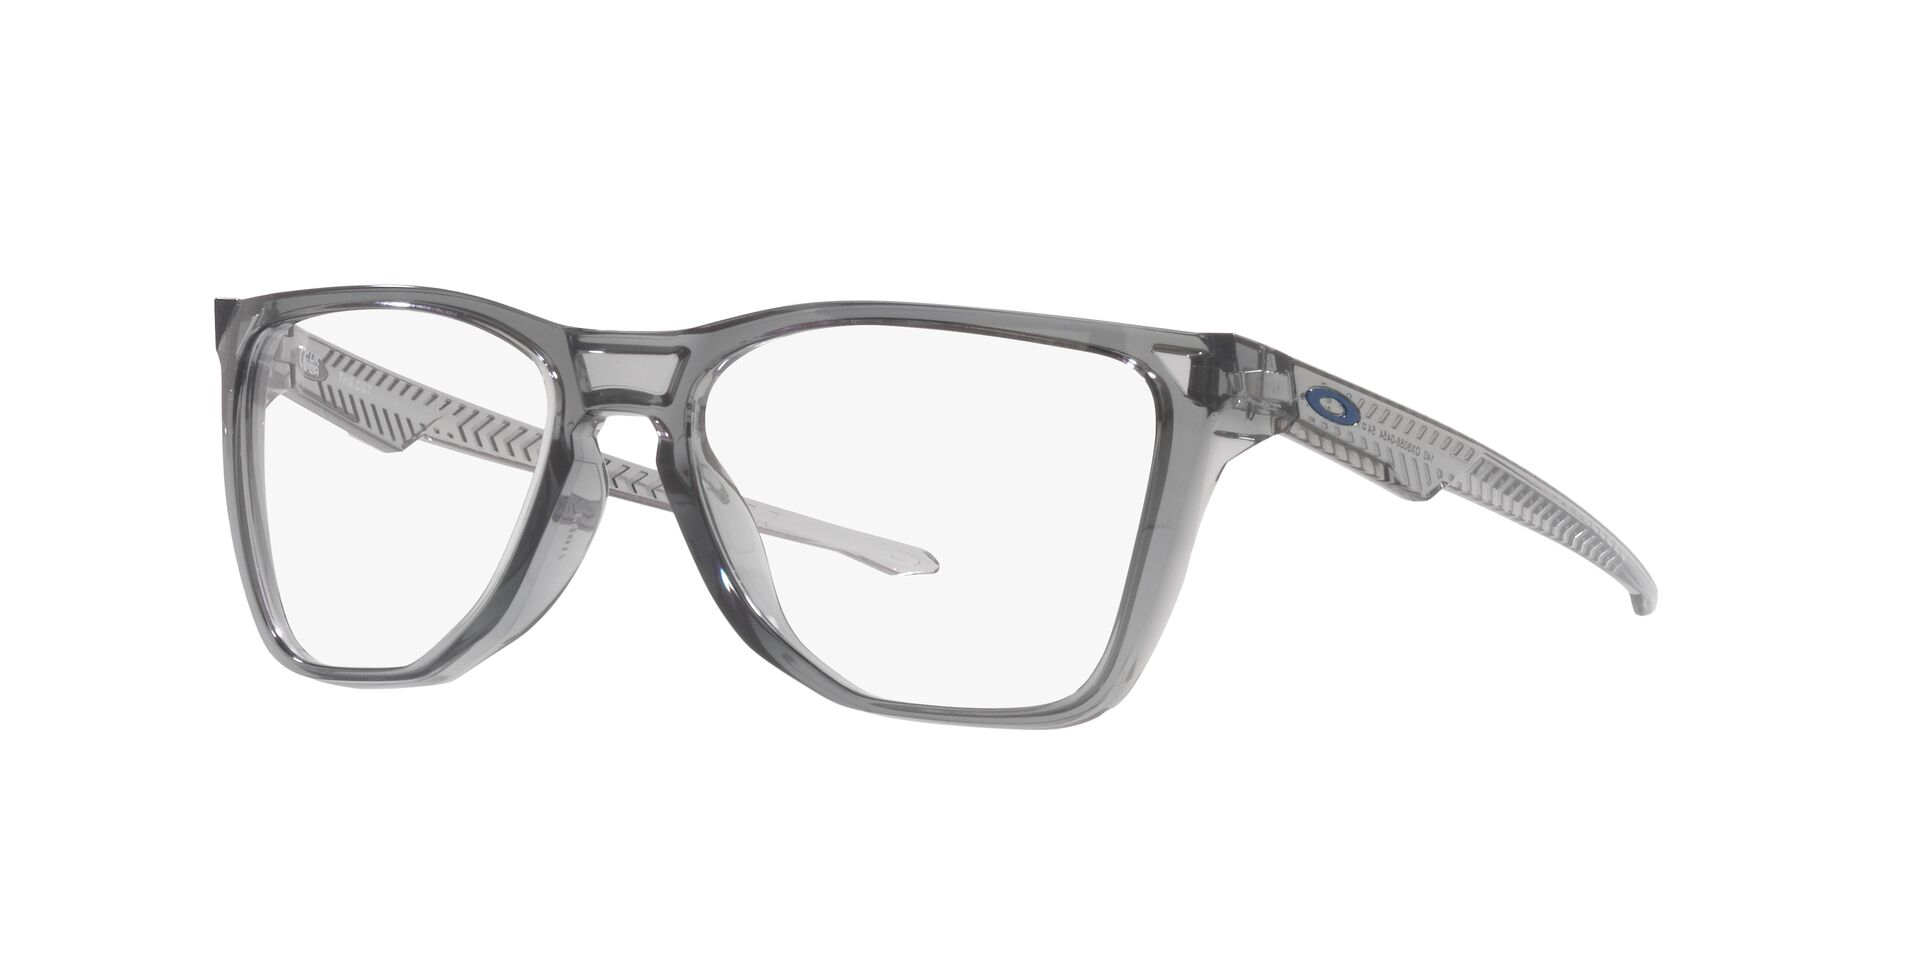 OAKLEY-THE-CUT-8058 805804 GREY SHADOW 56*17, , hi-res image number 0